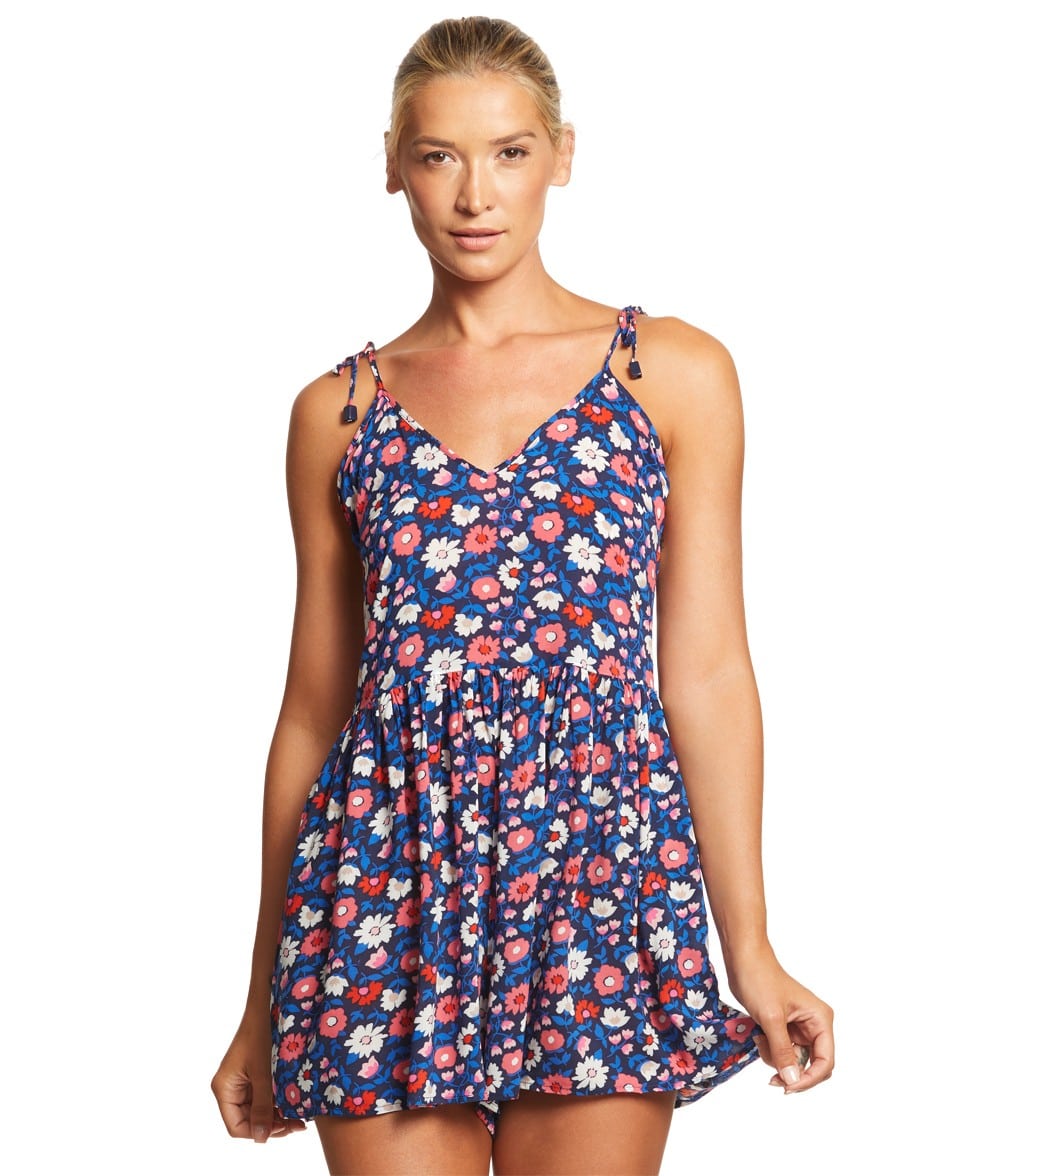 Kate Spade New York Botany Bay Romper Cover Up at SwimOutlet.com - Free ...